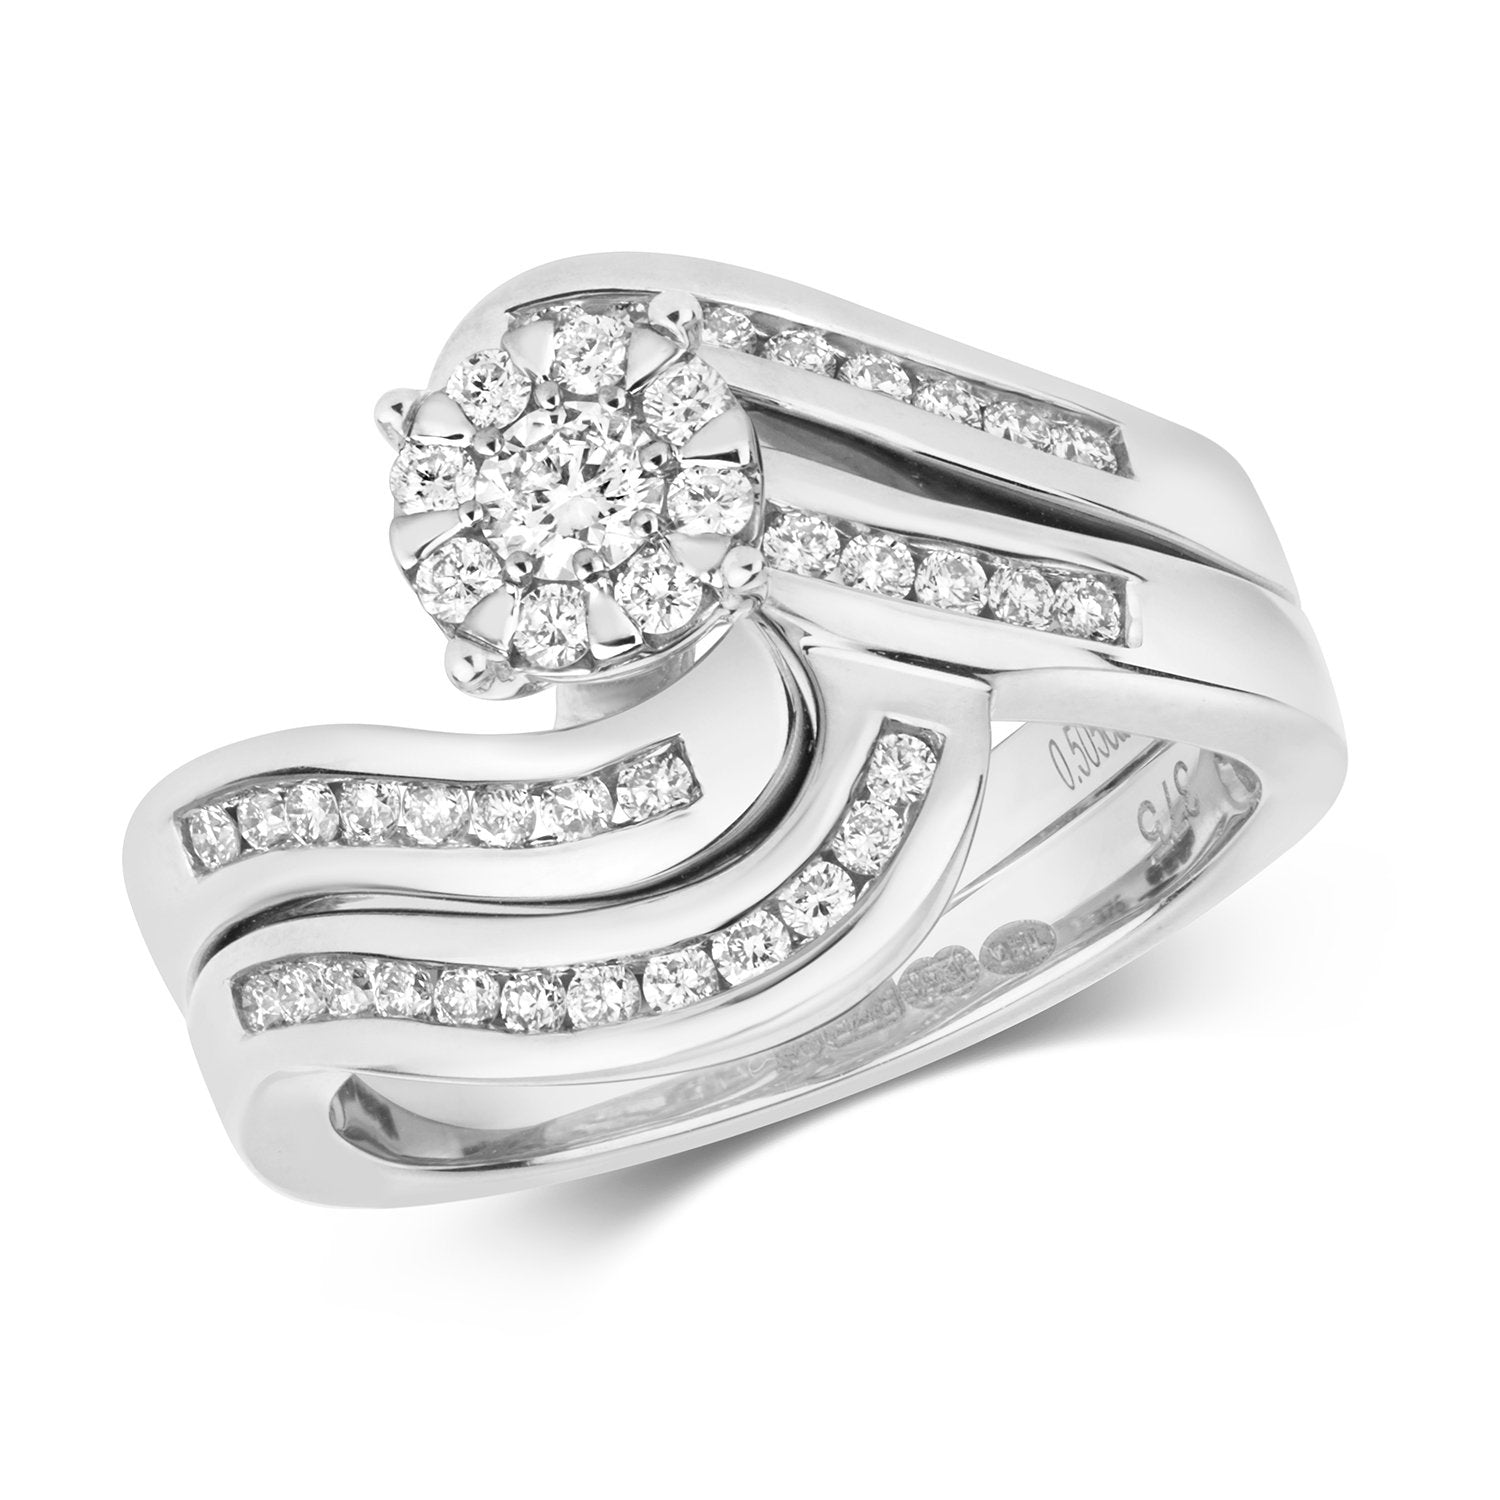 .50ct Round Diamond Engagement Ring & Channel Set Shaped Wedding Ring (Rd181w)